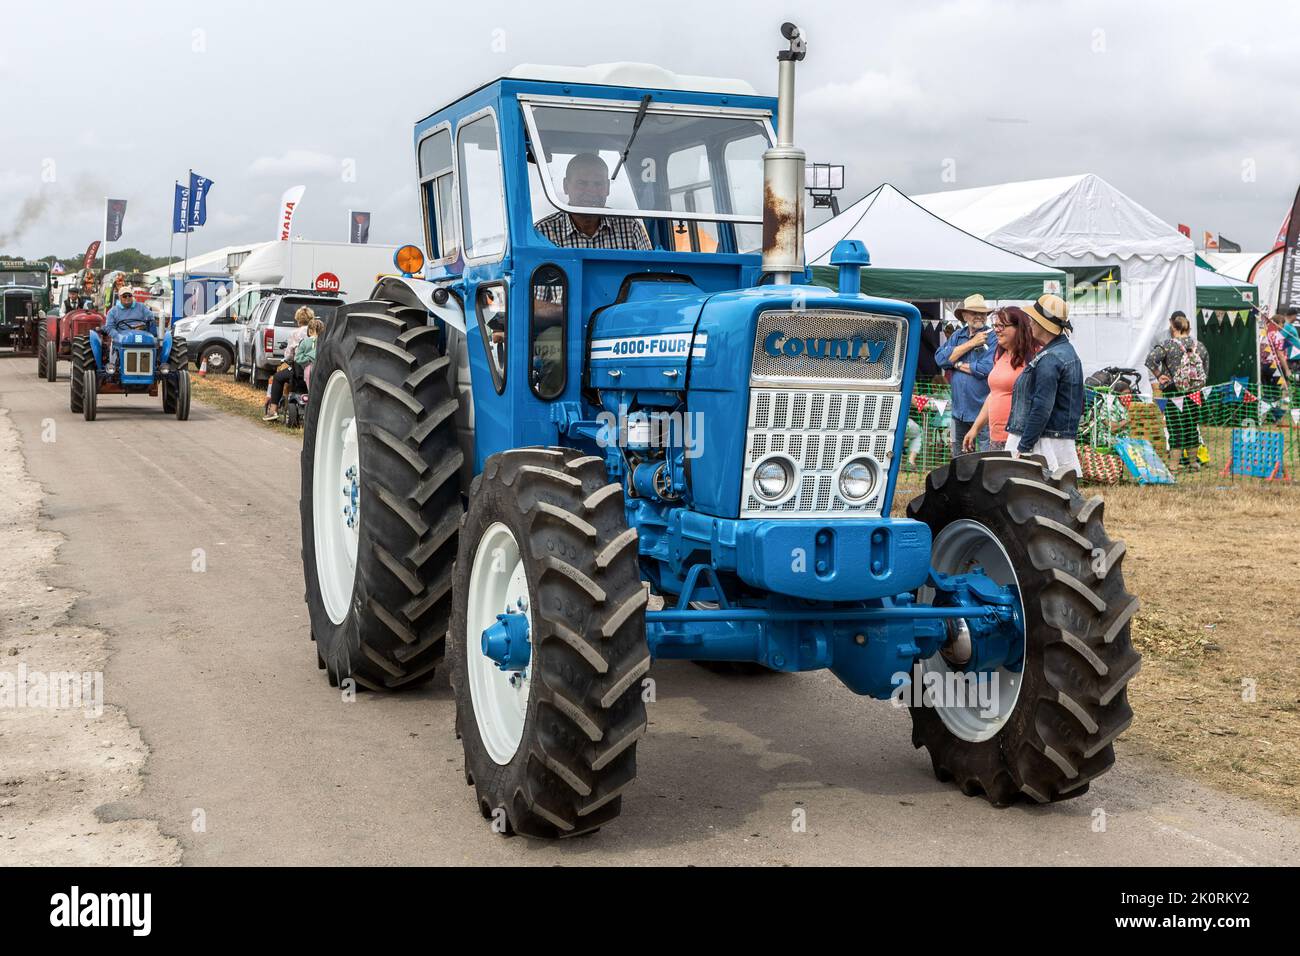 County 4000-four Tractor, 1968 - 1975, Farm Machinery Parade, Dorset County Show 2022, Dorset, Royaume-Uni Banque D'Images